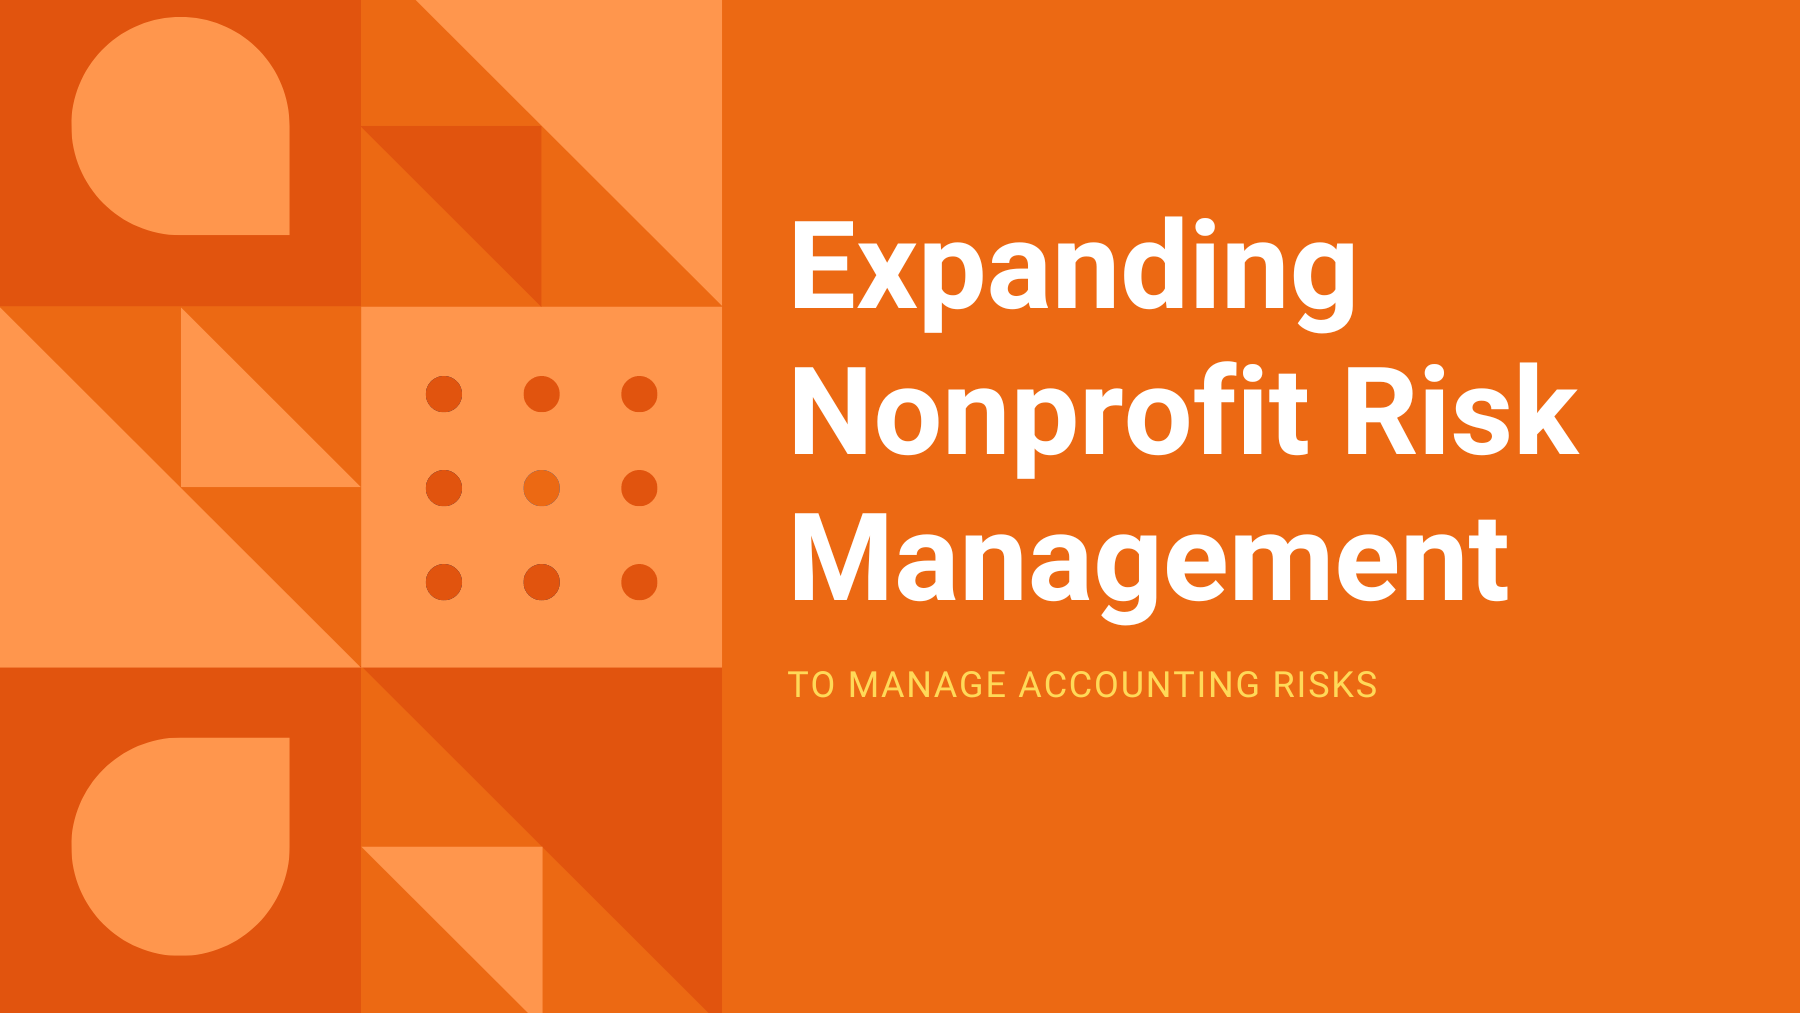 Expanding Nonprofit Risk Management to Manage Accounting Risks